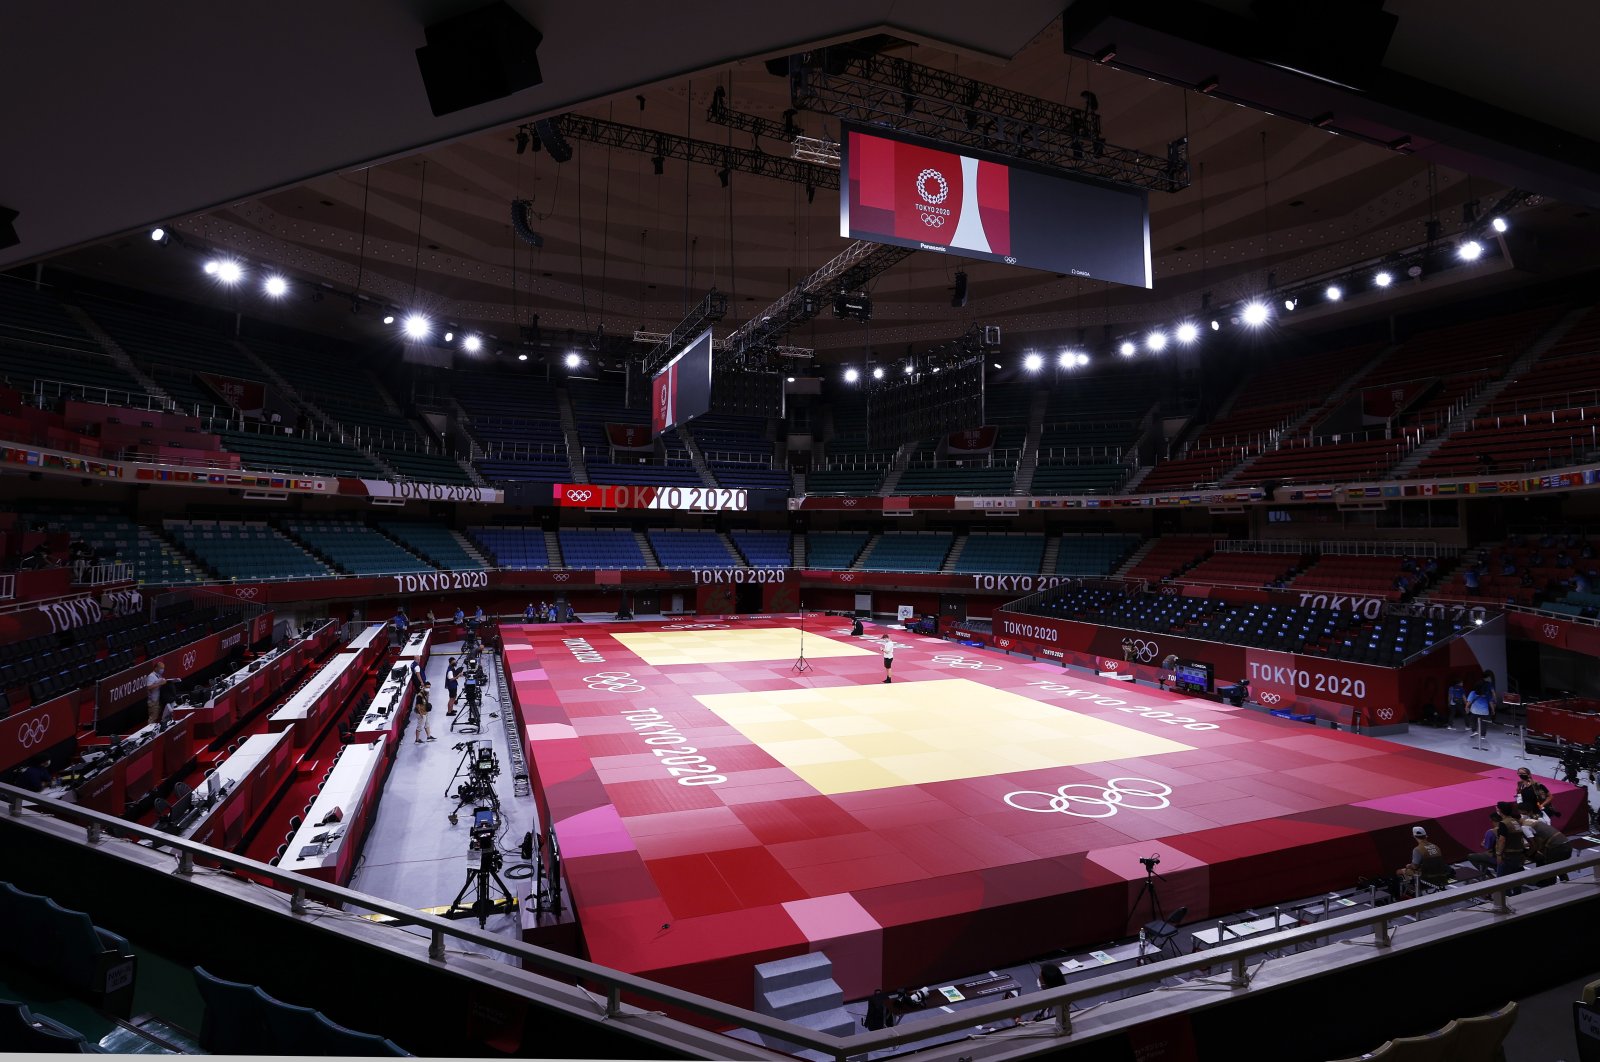 General view of the Nippon Budokan arena before the start of the Judo competitions of the Tokyo 2020 Olympic Games in Tokyo, Japan, July 24, 2021. (EPA Photo)